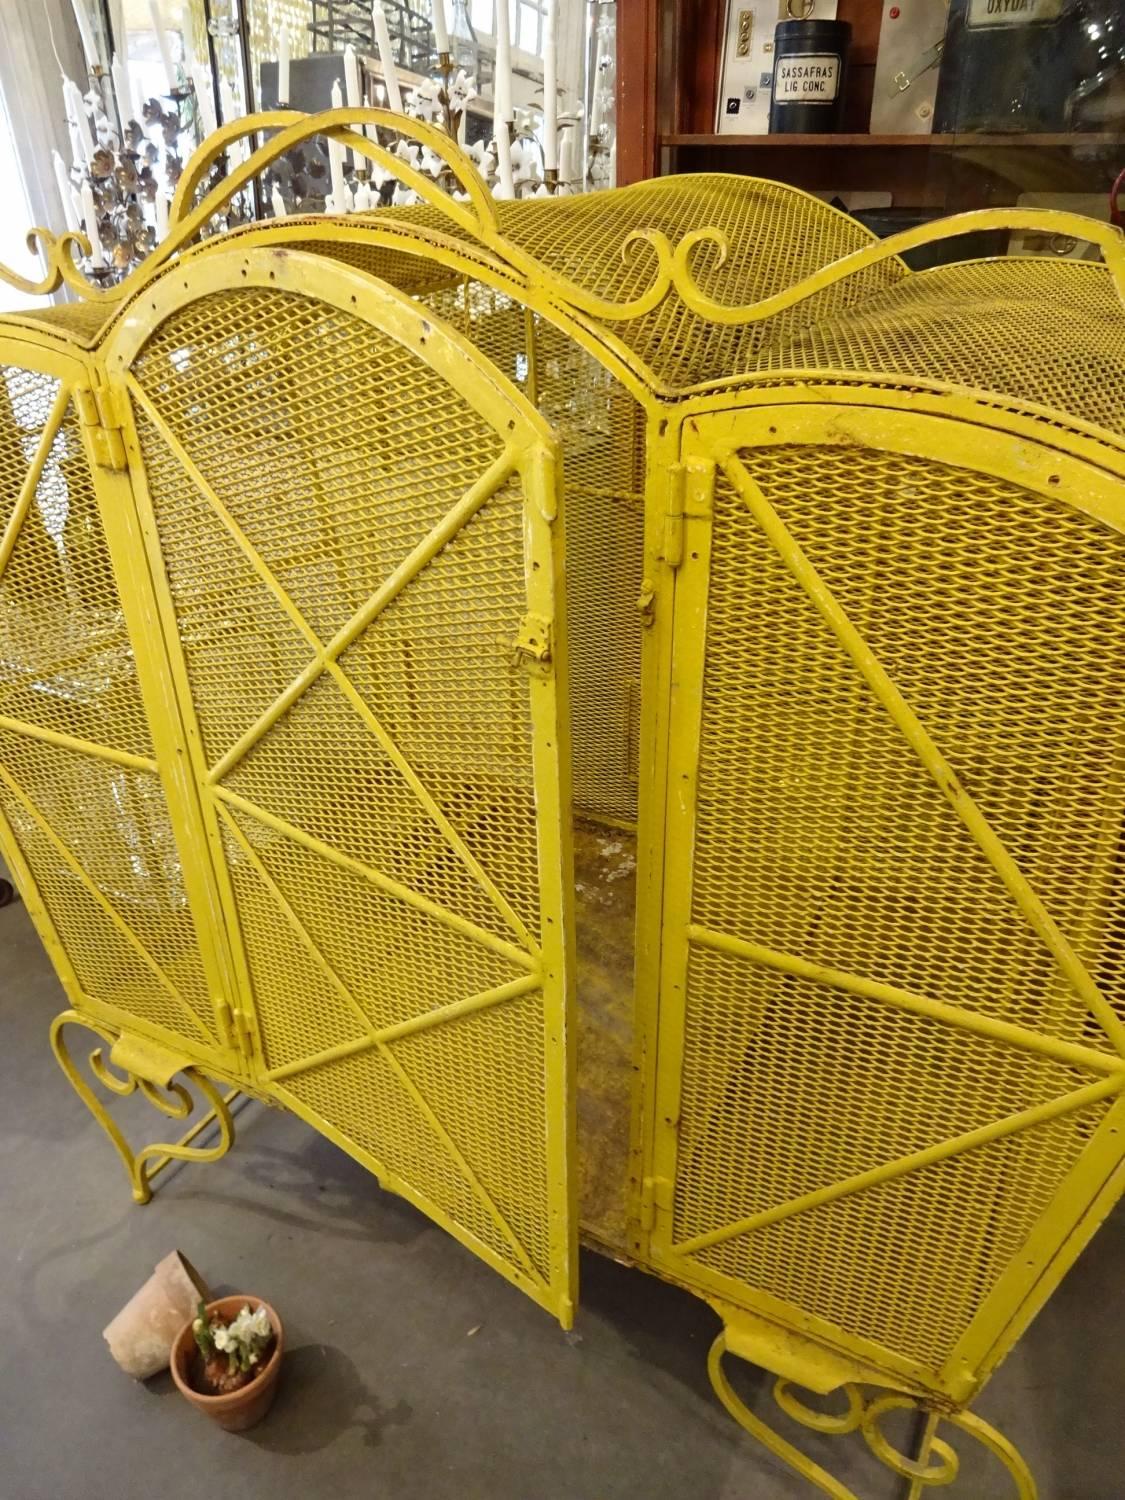 Completely extraordinary vintage French birdcage – aviary/voliere size. This fantastic piece is hand made in cast iron, and painted a glorious sunny yellow. Superb details. Comes complete with trapeze, feed and water troughs. Would make a wonderful